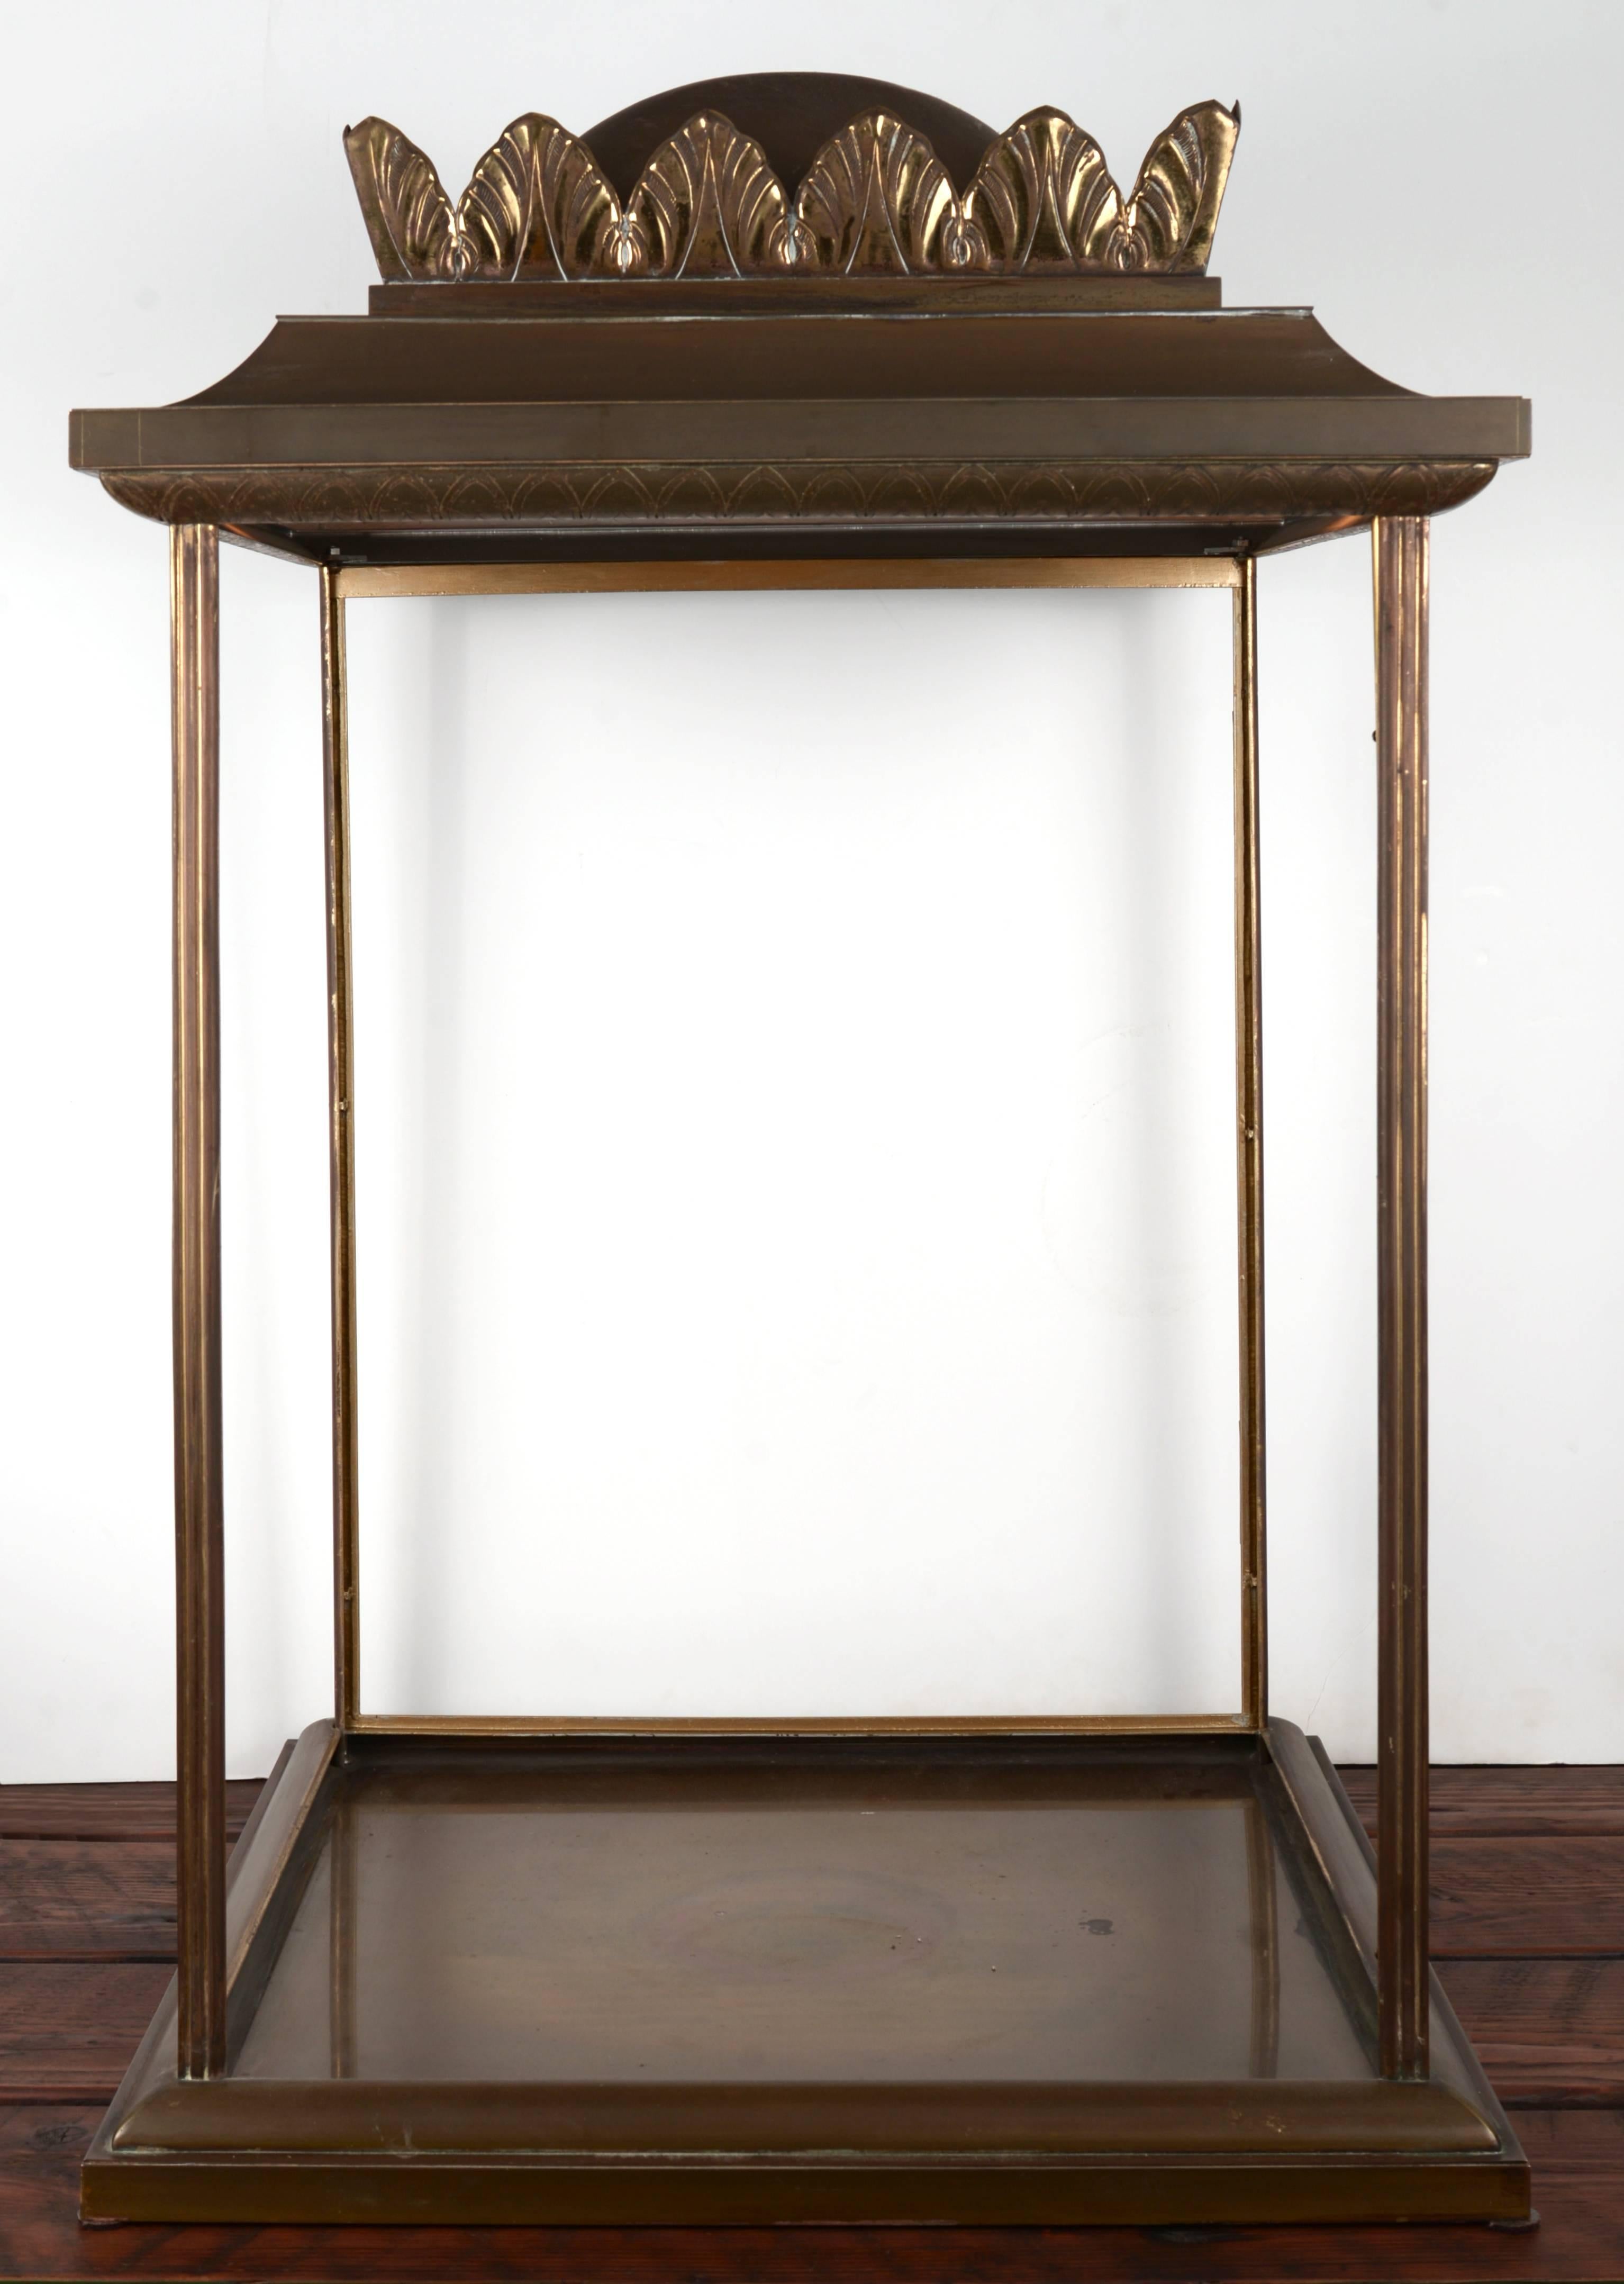 Large-scale open-style illuminated brass vitrine with a dome top and acanthus leaves detailing.